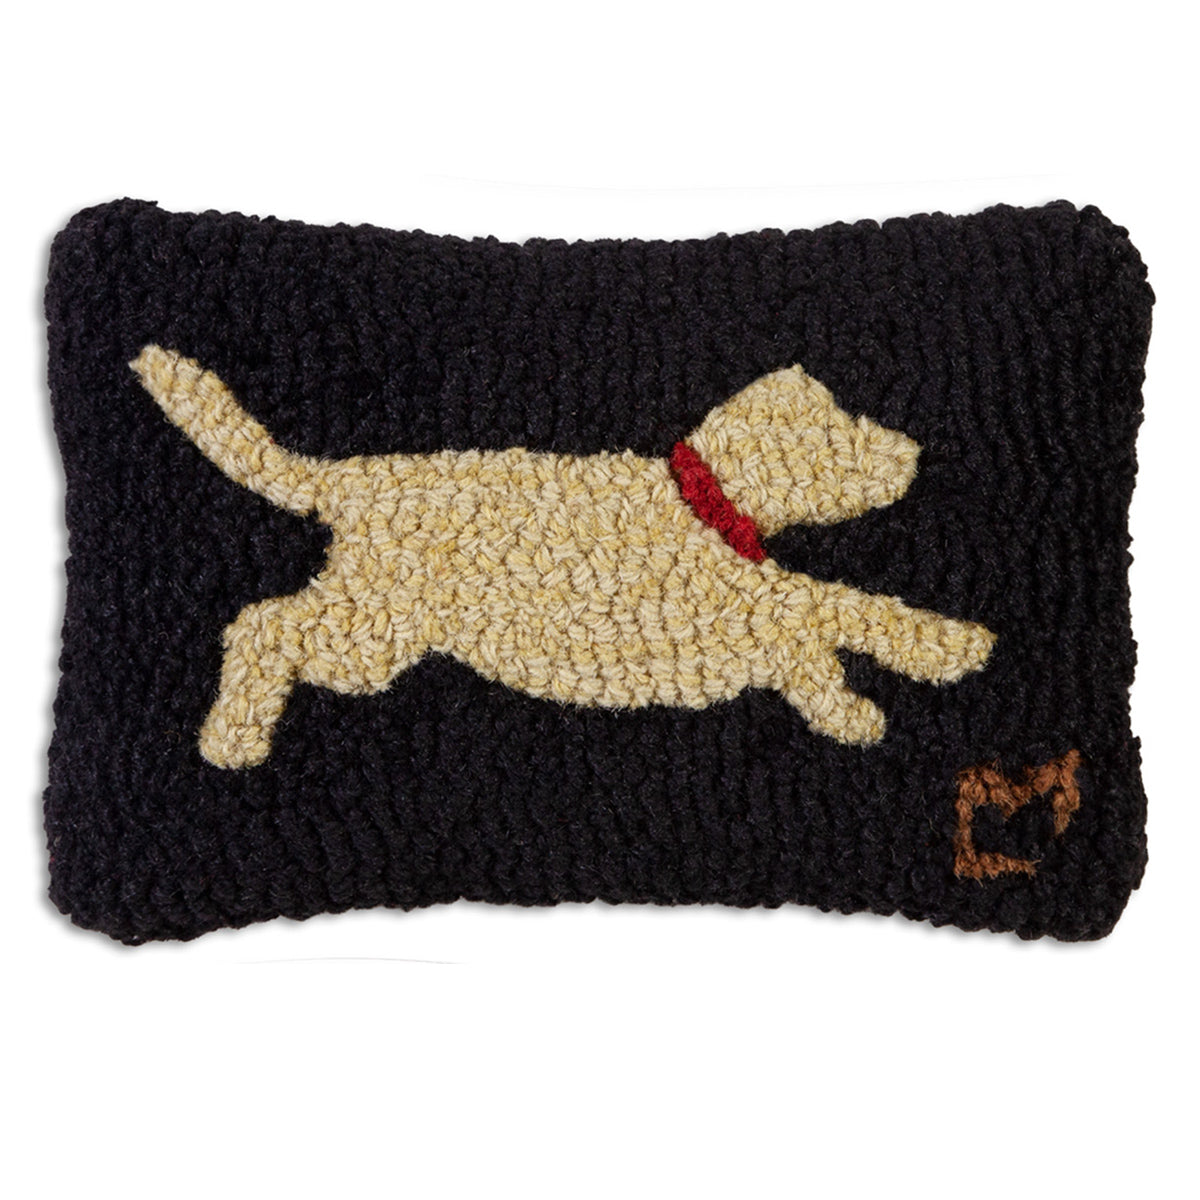 Running Yellow Lab - Hooked Wool Pillow